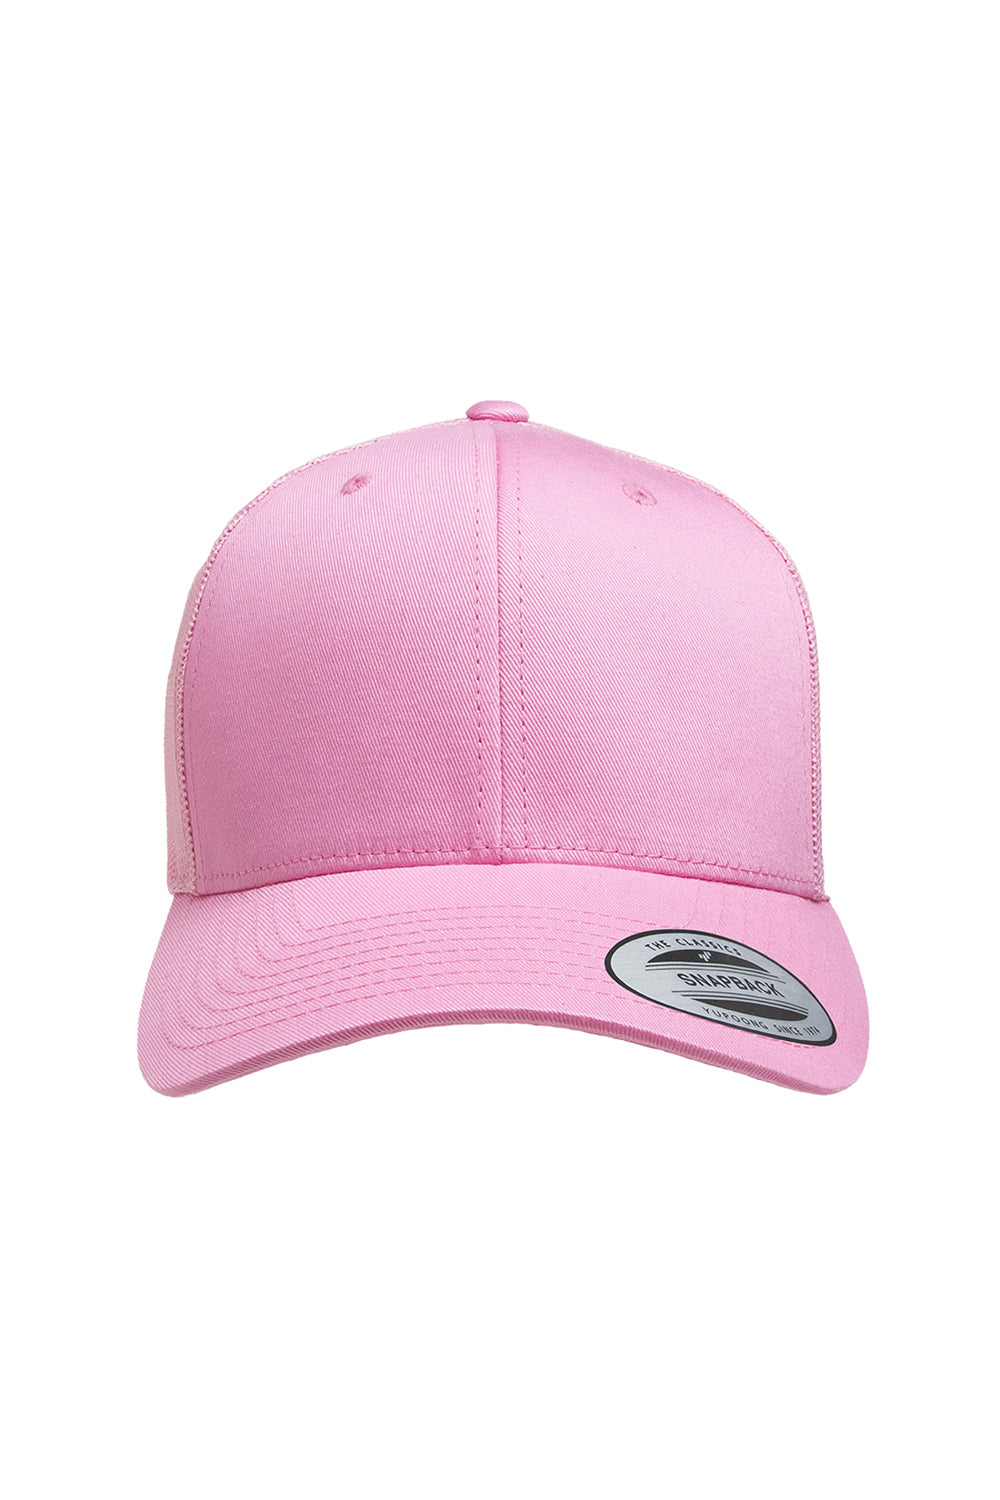 Yupoong 6606 Mens Adjustable Trucker Hat Pink Front